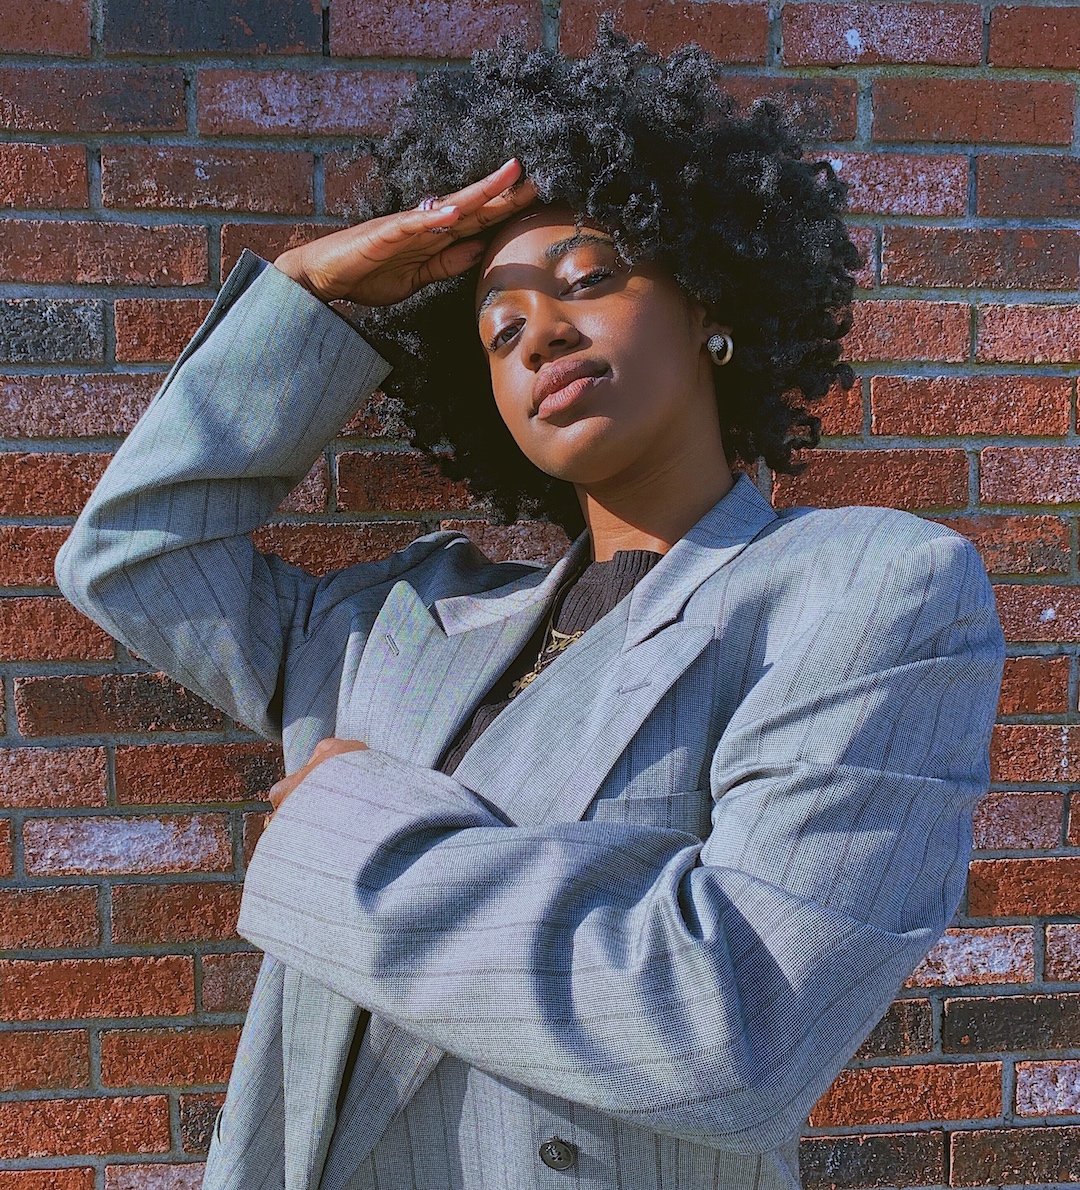 A dark skinned woman posing and wearing a suit jacket in front a brick wall.